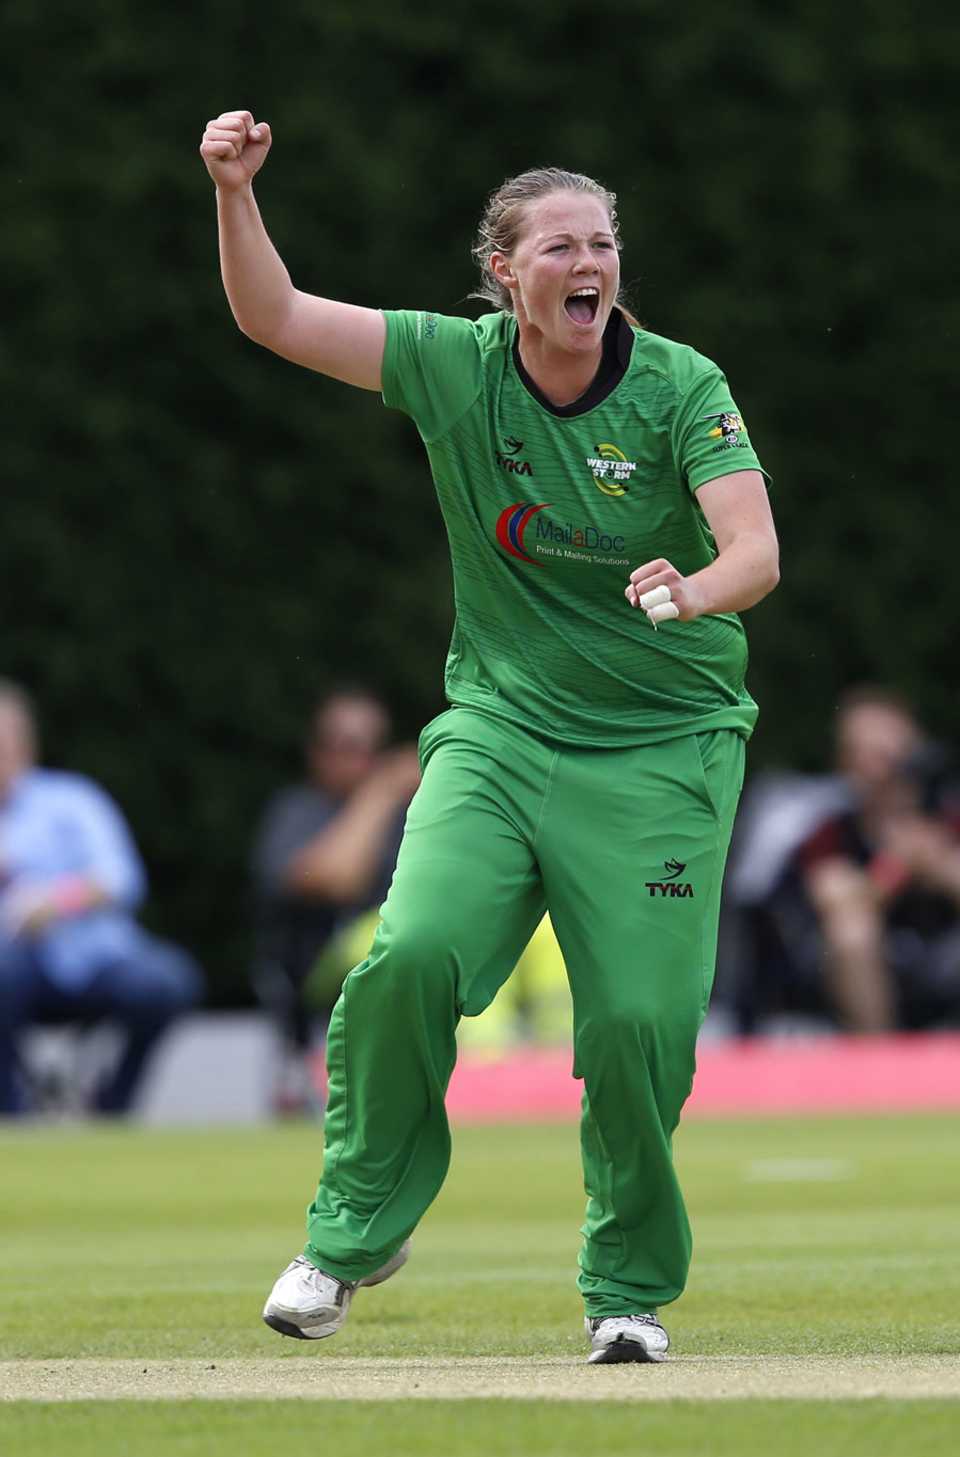 Anya Shrubsole claims a wicket